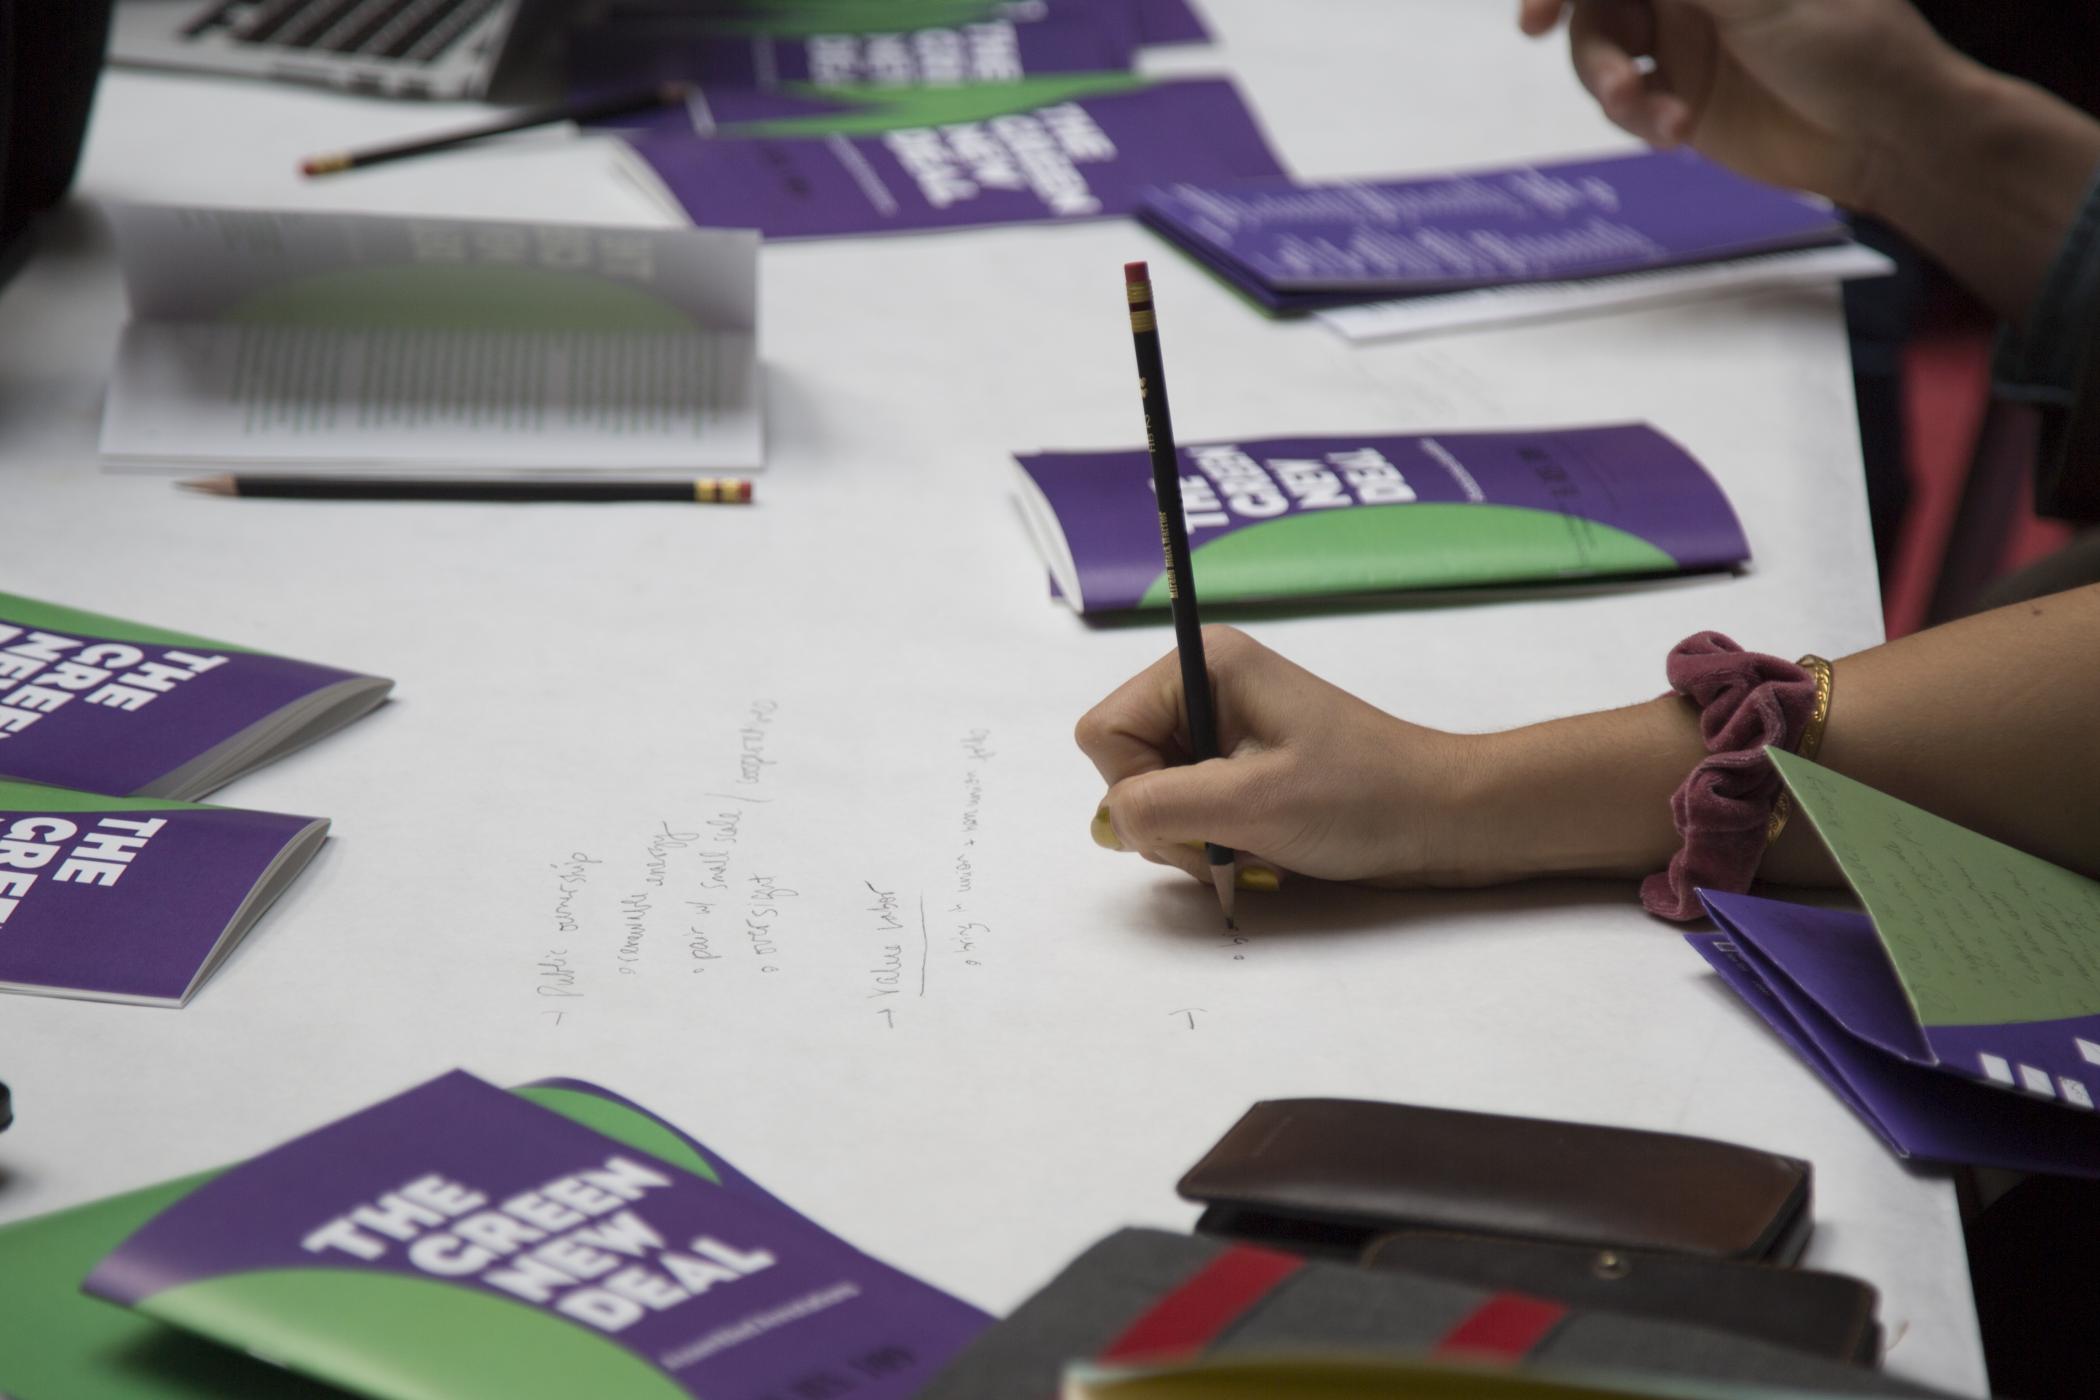 A hand grips a pencil and writes notes beside purple and green booklets titled "The Green New Deal: Assembled Annotations"